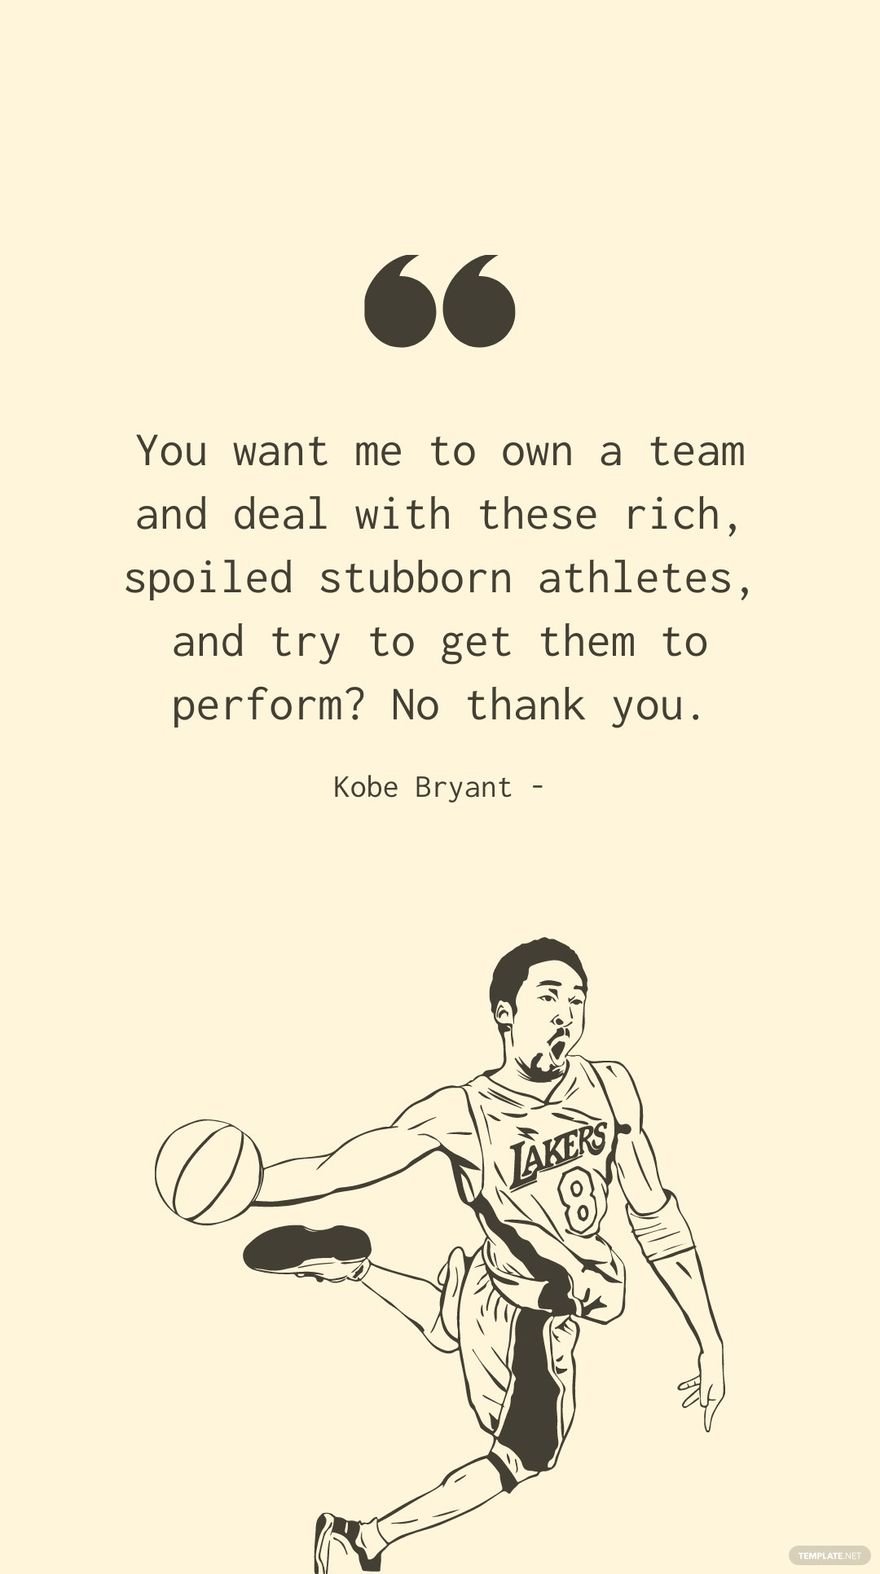 Free Kobe Bryant - You want me to own a team and deal with these rich, spoiled stubborn athletes, and try to get them to perform? No thank you. in JPG